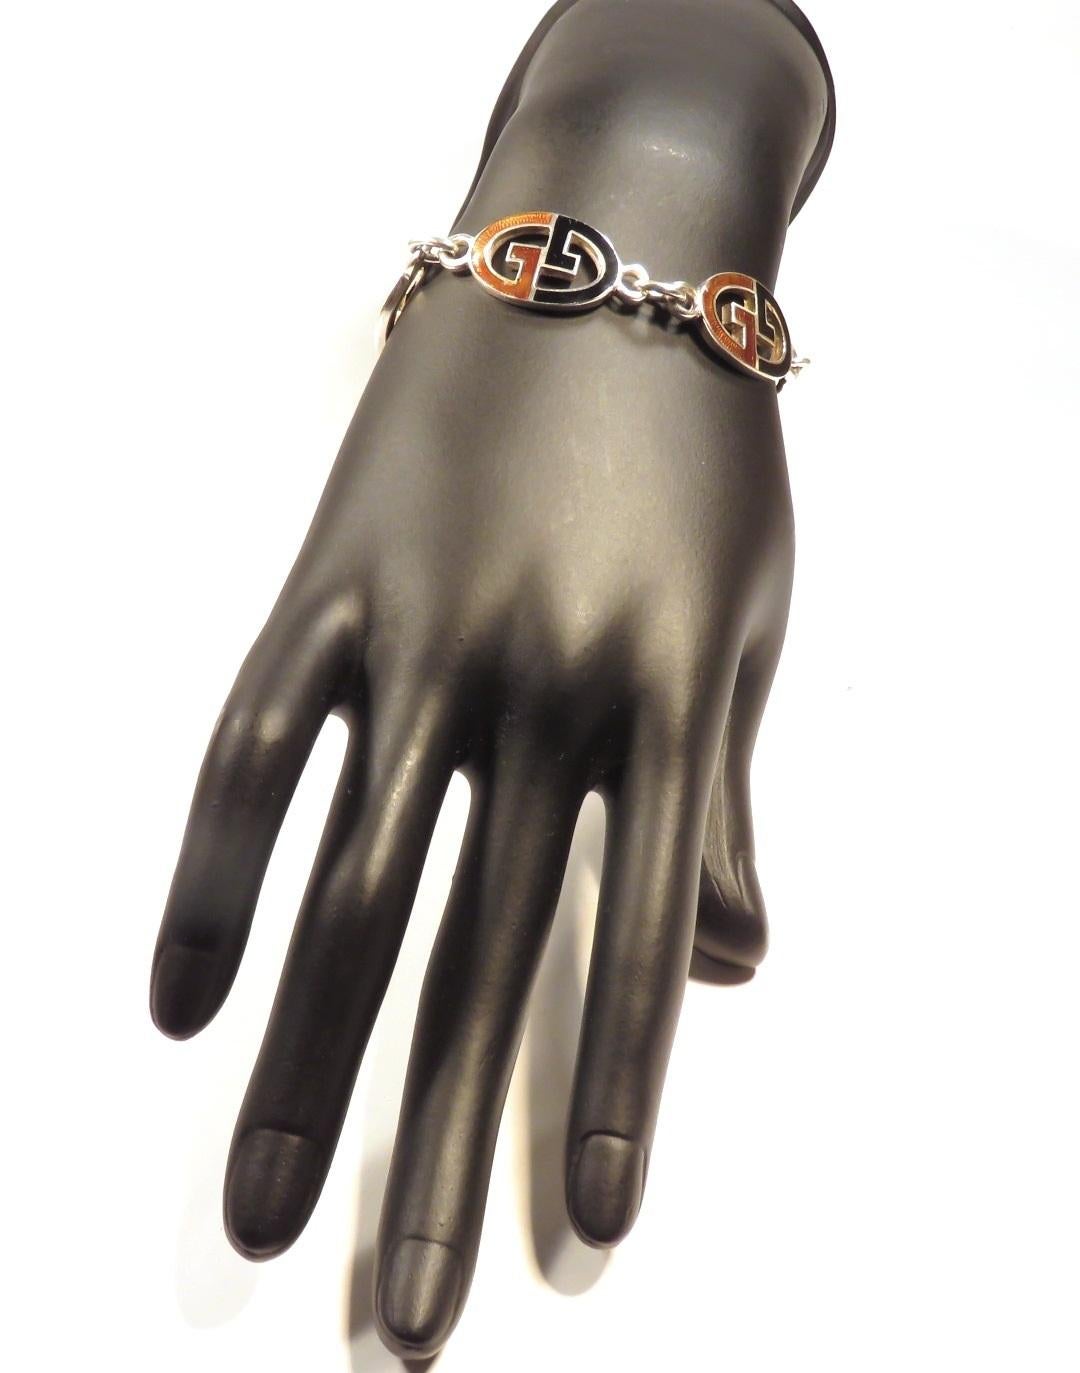 Contemporary Gucci Sterling Silver Black Brown Enamel Iconic Bracelet Handcrafted in Italy For Sale